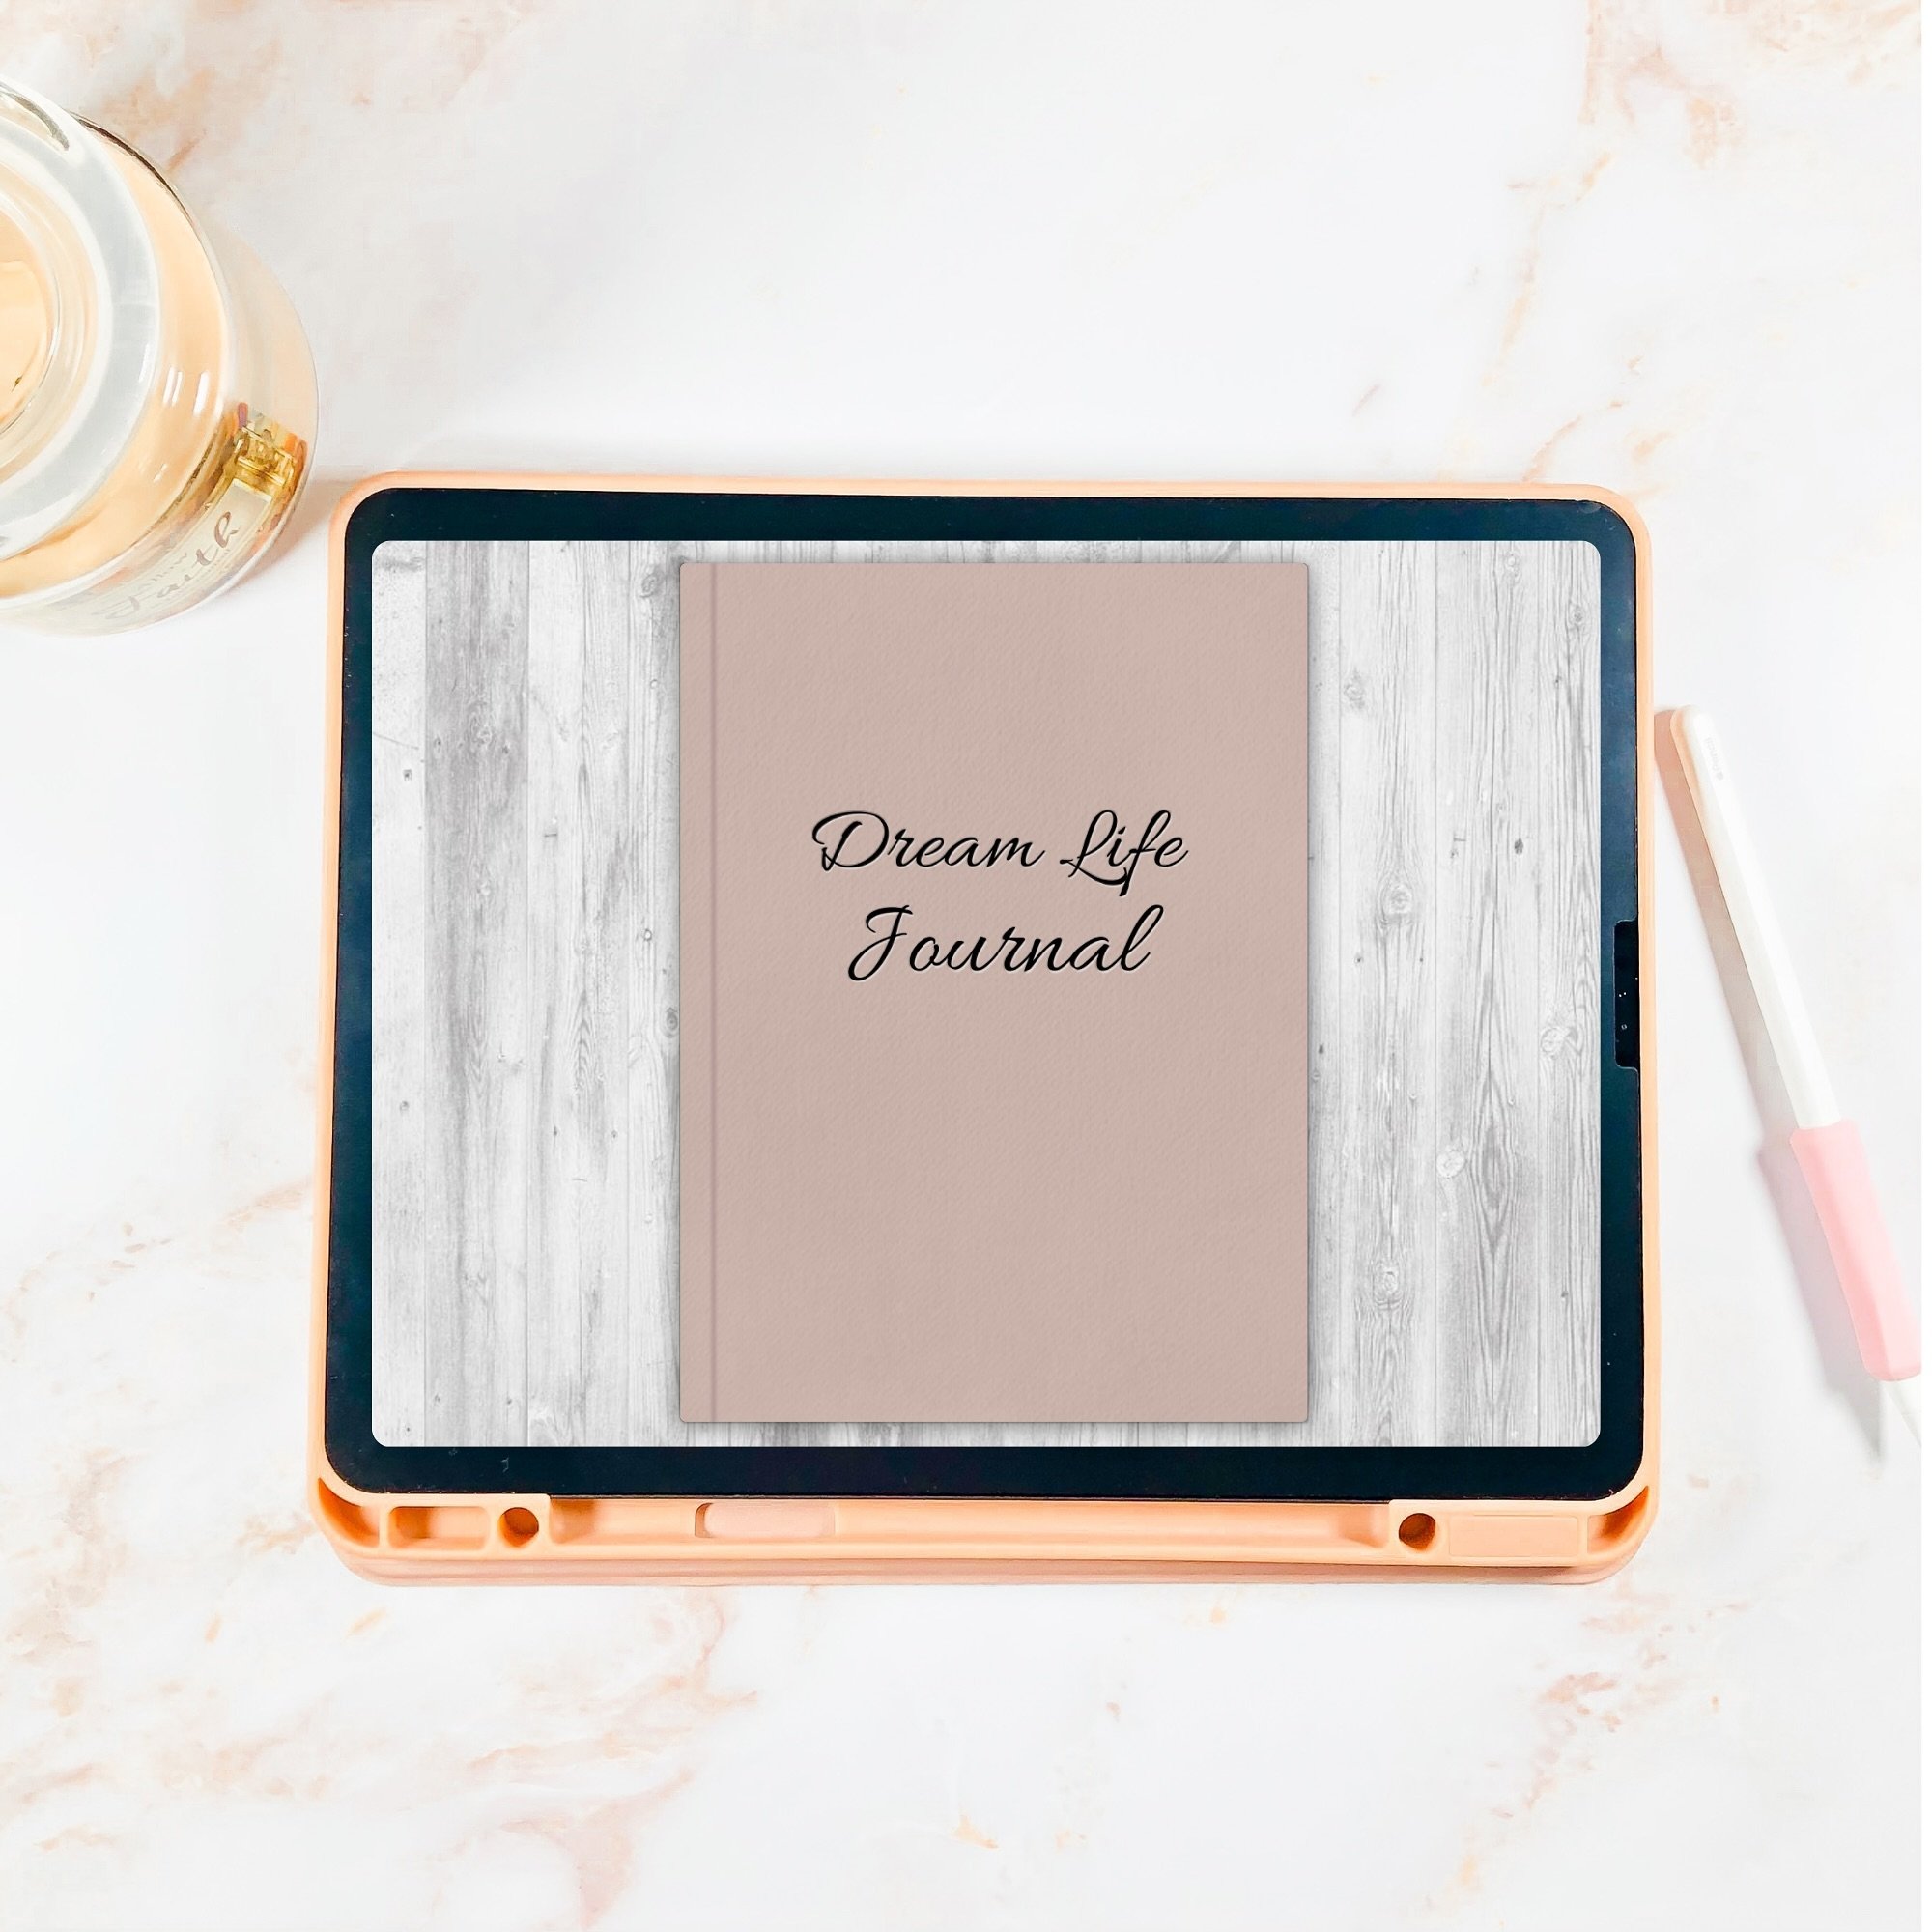 Want a simple way to create a clearer mind to be more calm, connected, and focused?

I used to wake up so overwhelmed I didn&rsquo;t know where to start with my day. Journaling has been a fantastic way to clear my mind, keep my goals top of mind, and